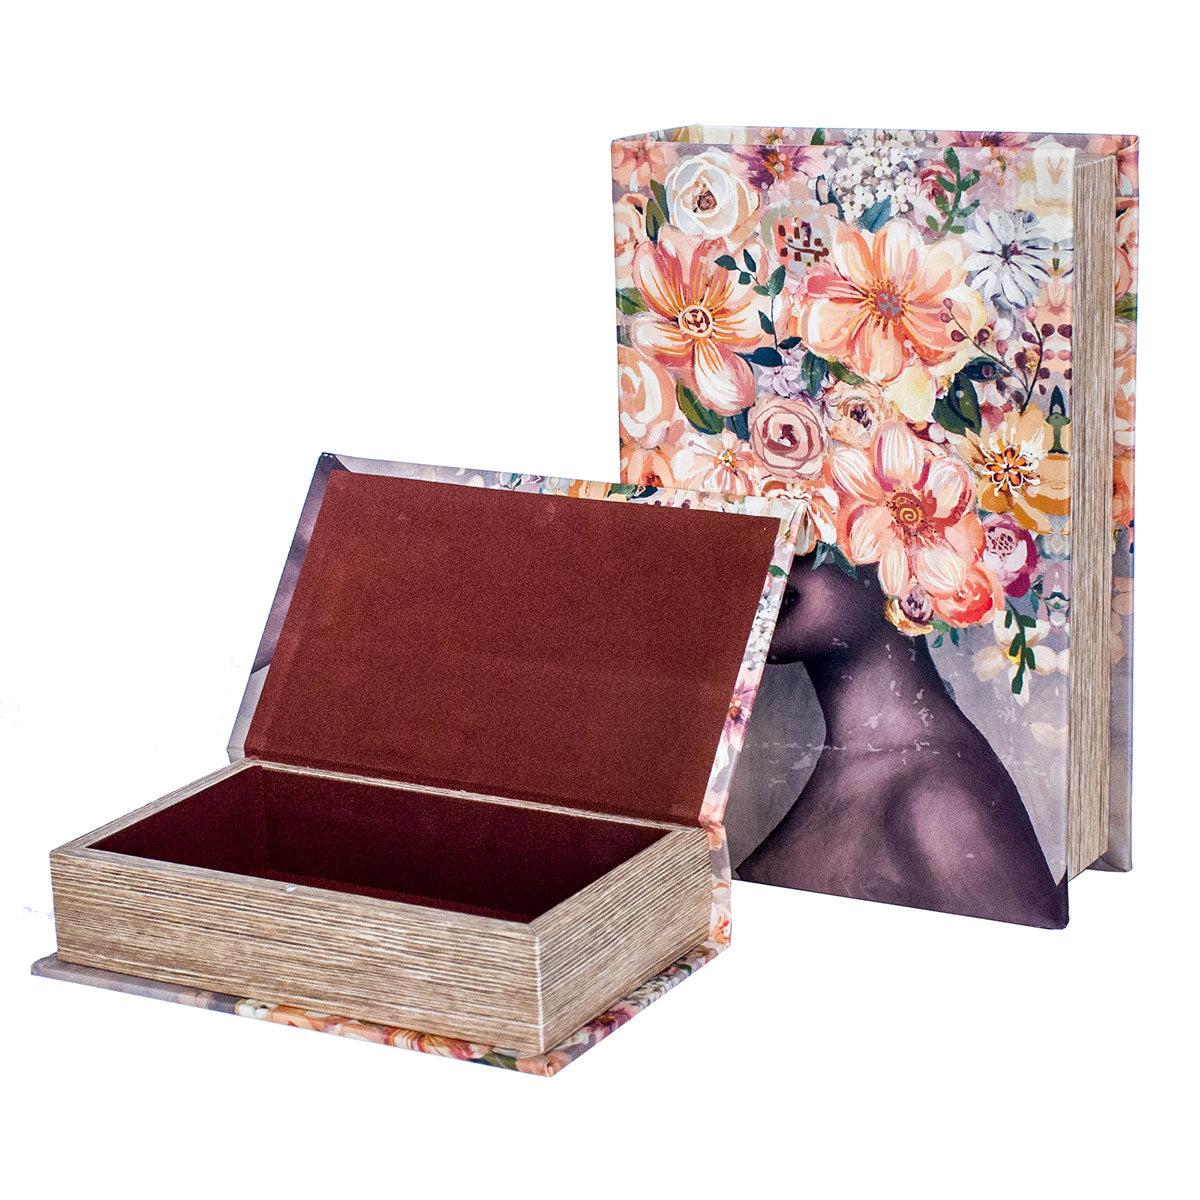 Woman with Flowers Book Box